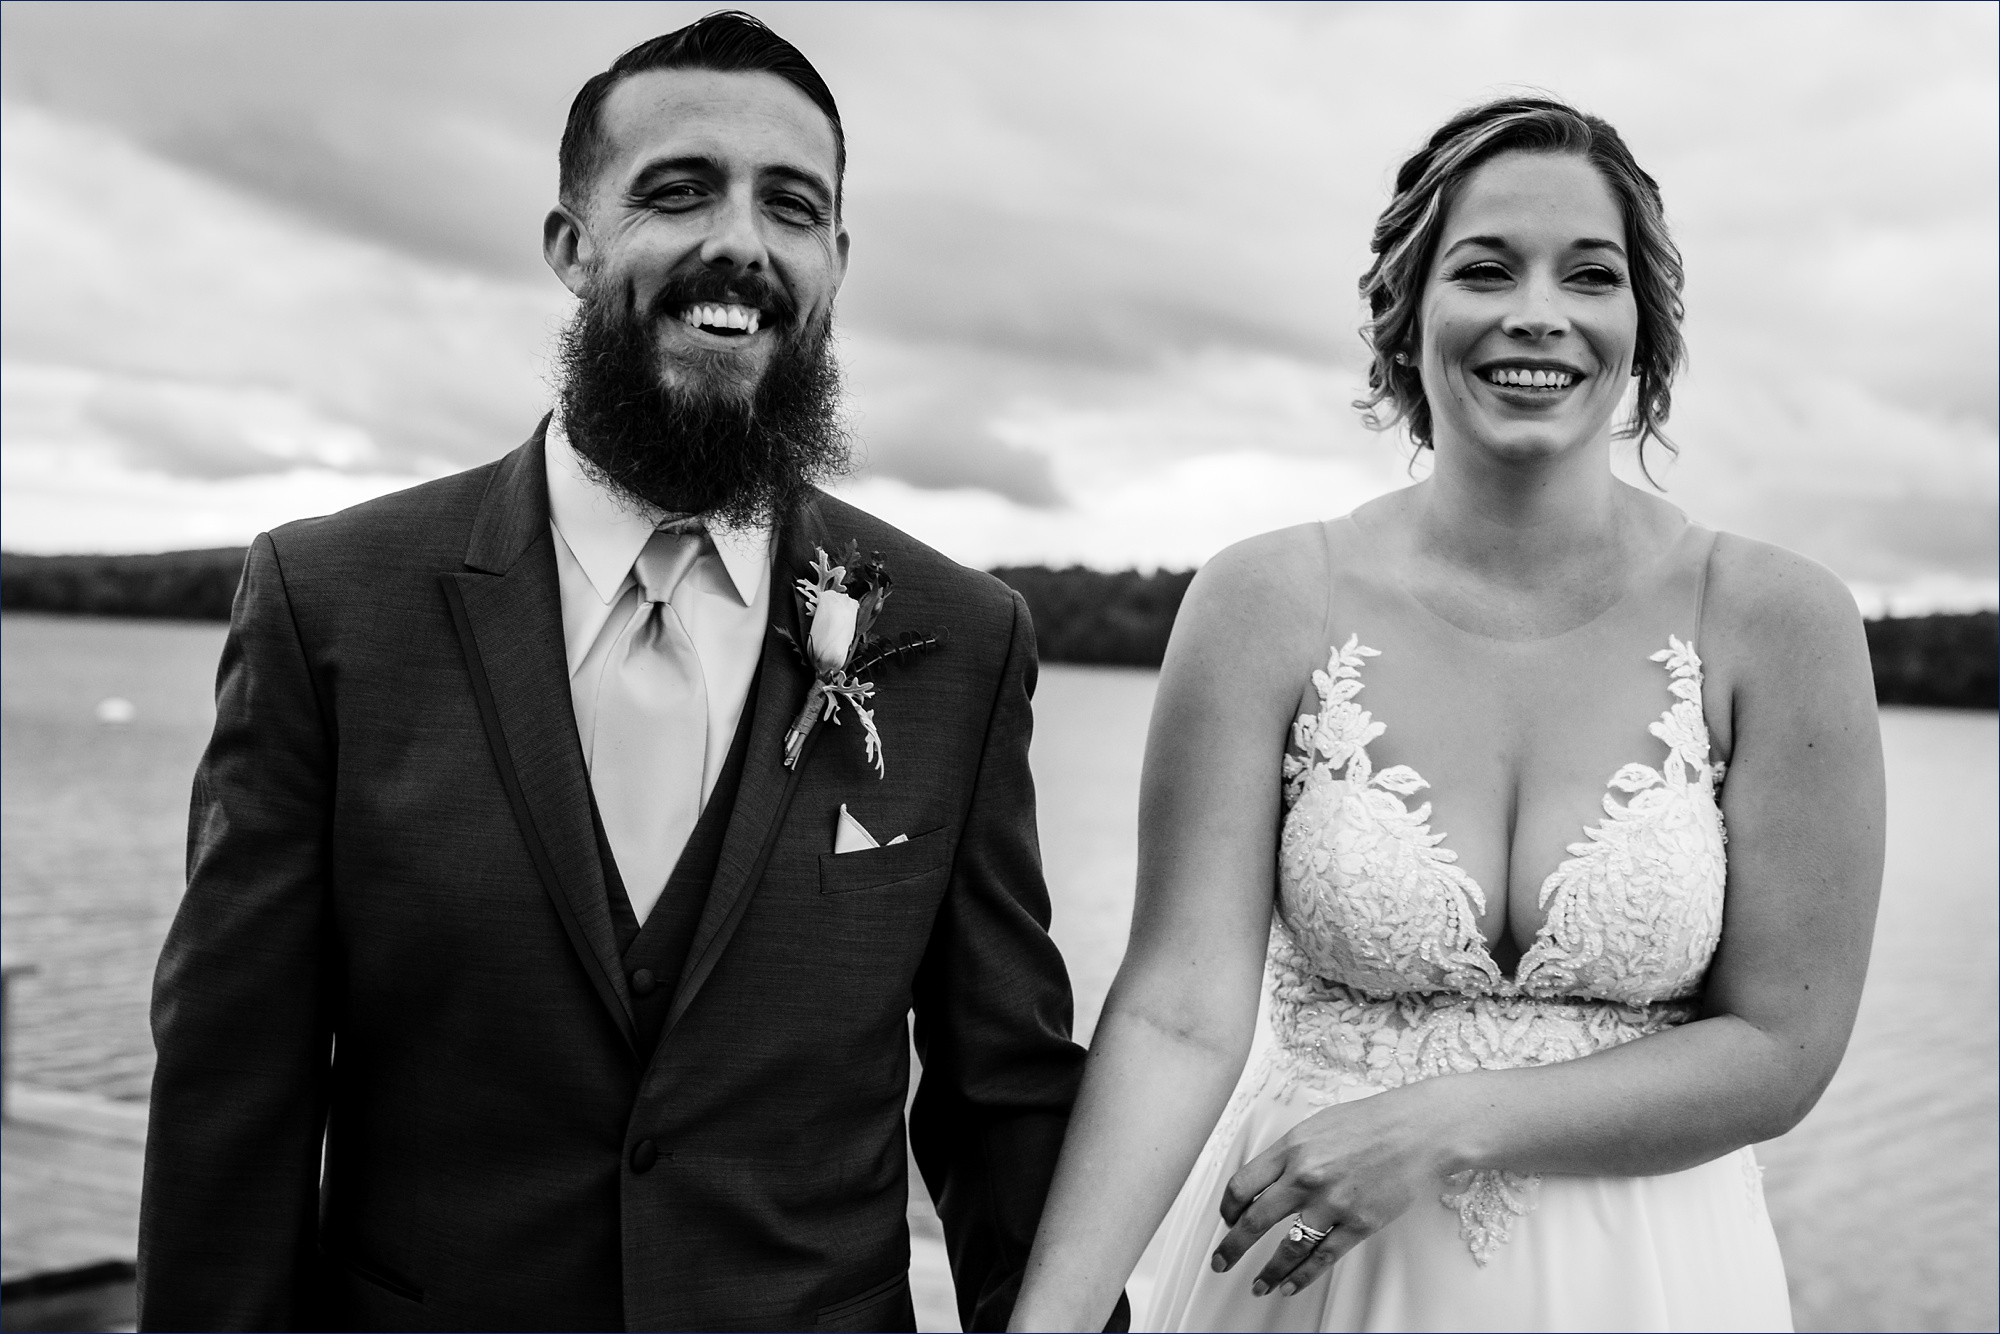 The bride and groom laugh while out by the lake at their Maine wedding